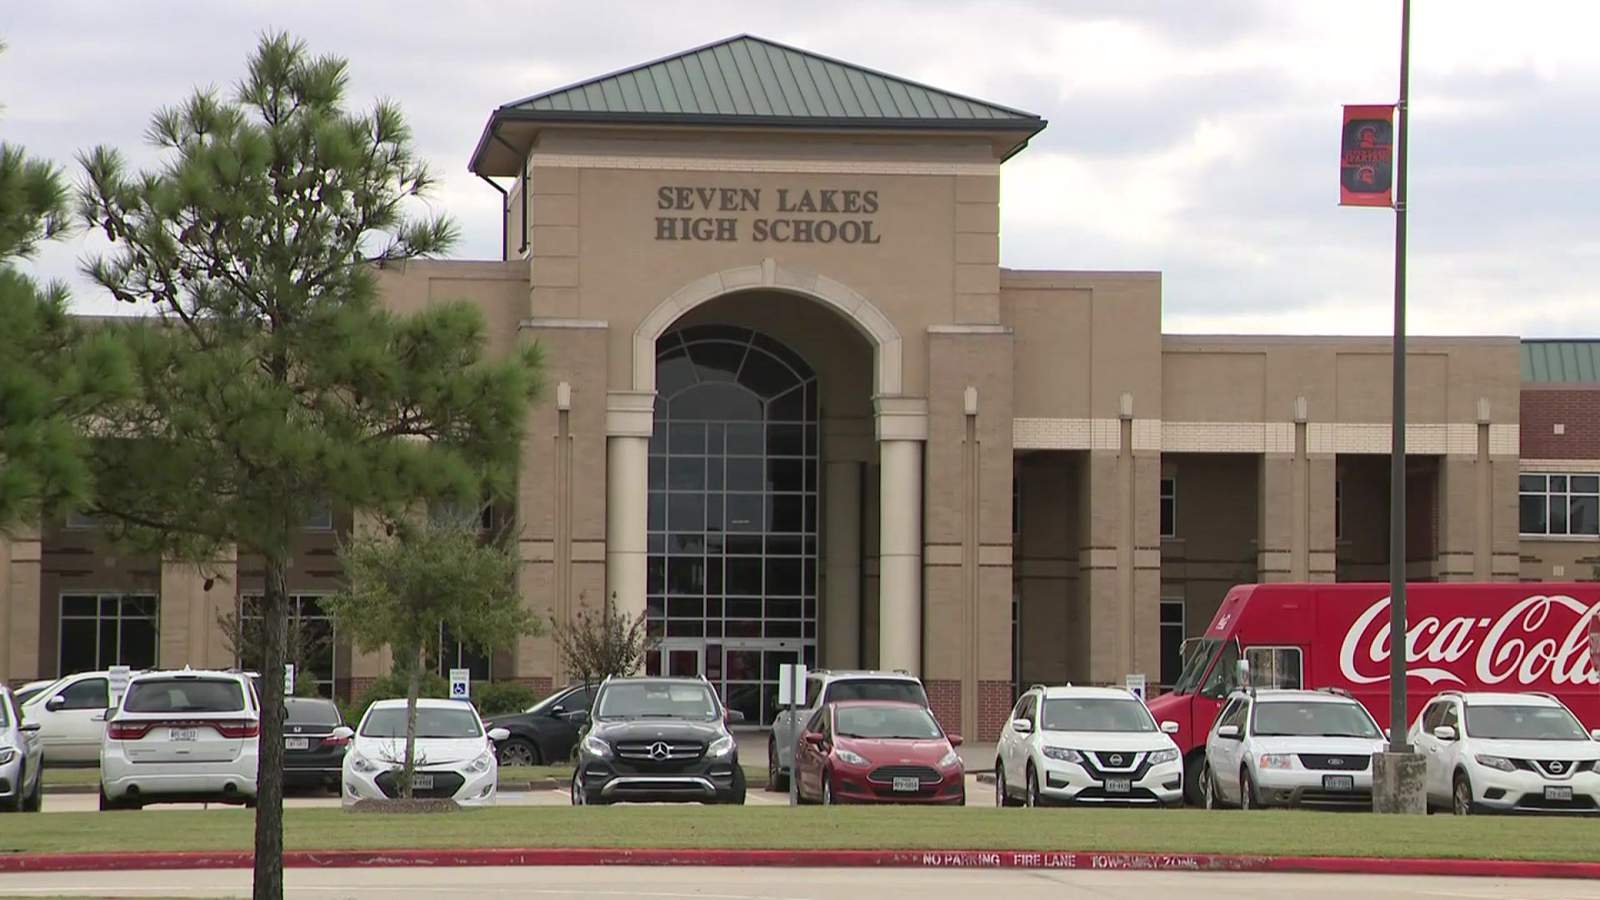 Seven Lakes High School to temporarily halt in-person classes after COVID-19 outbreak on campus